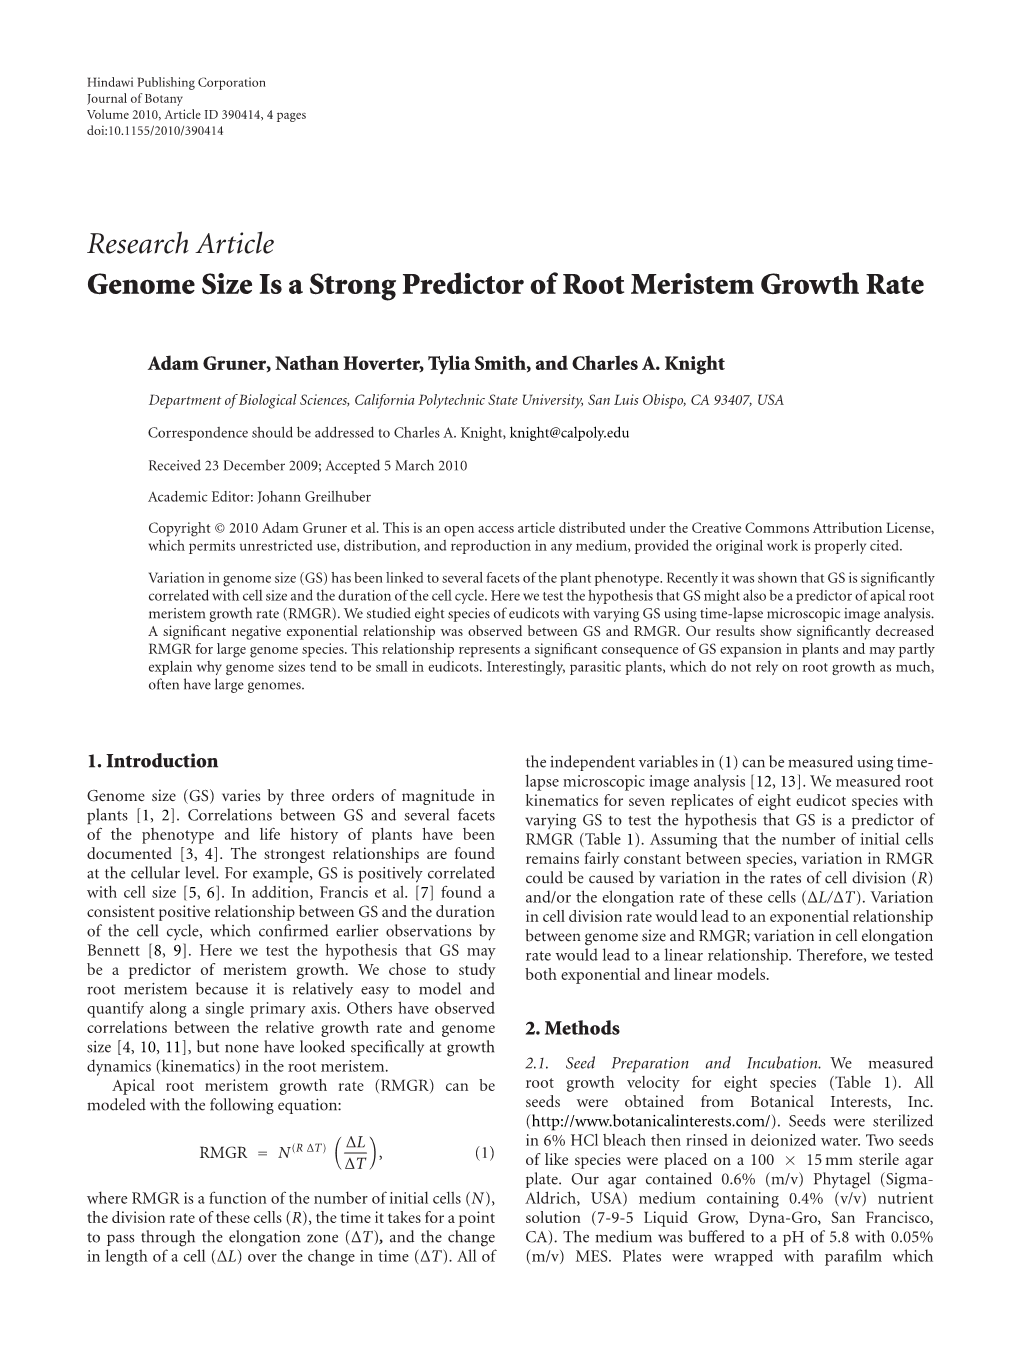 Genome Size Is a Strong Predictor of Root Meristem Growth Rate